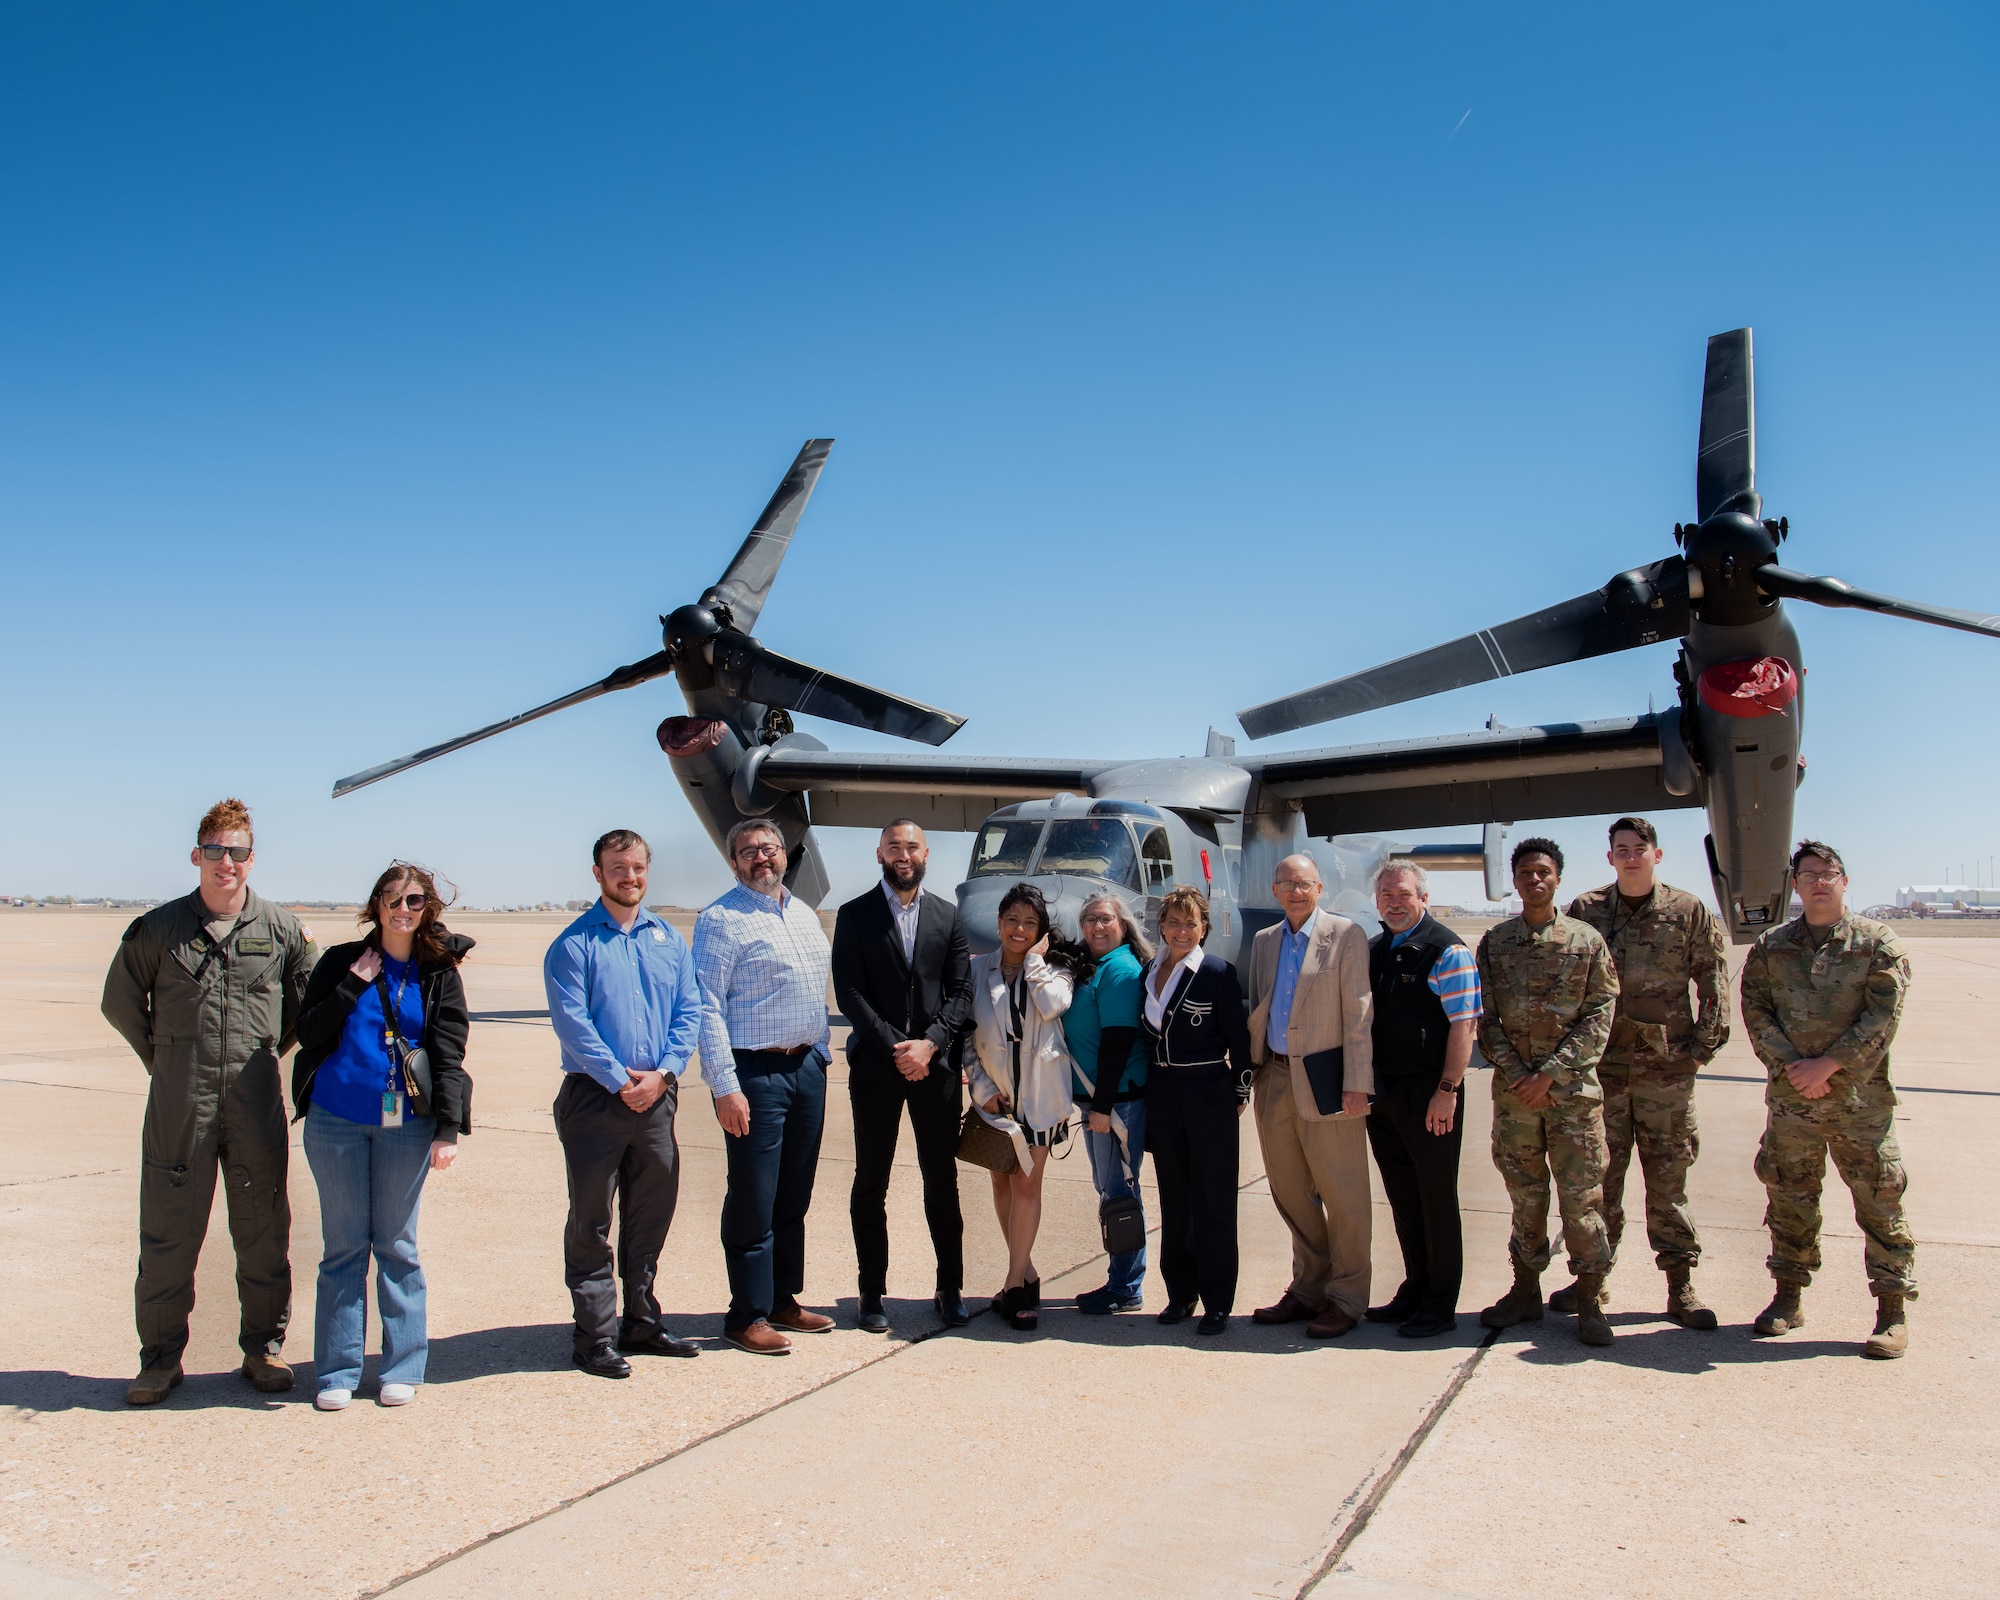 U.S Air Force Airmen from the 27th Special
Operations Wing and community members with
the Base Community Council take a photo in front
of a CV-22 Osprey at Cannon Air Force Base,
N.M., March 22, 2024. The BCC’s vision has
provided Air Commandos and community
members an action-oriented forum that can bridge
our military and local communities through
common understanding and shared activities. (U.S
Air Force Photo by Tech Sgt. Kaylee Clark)